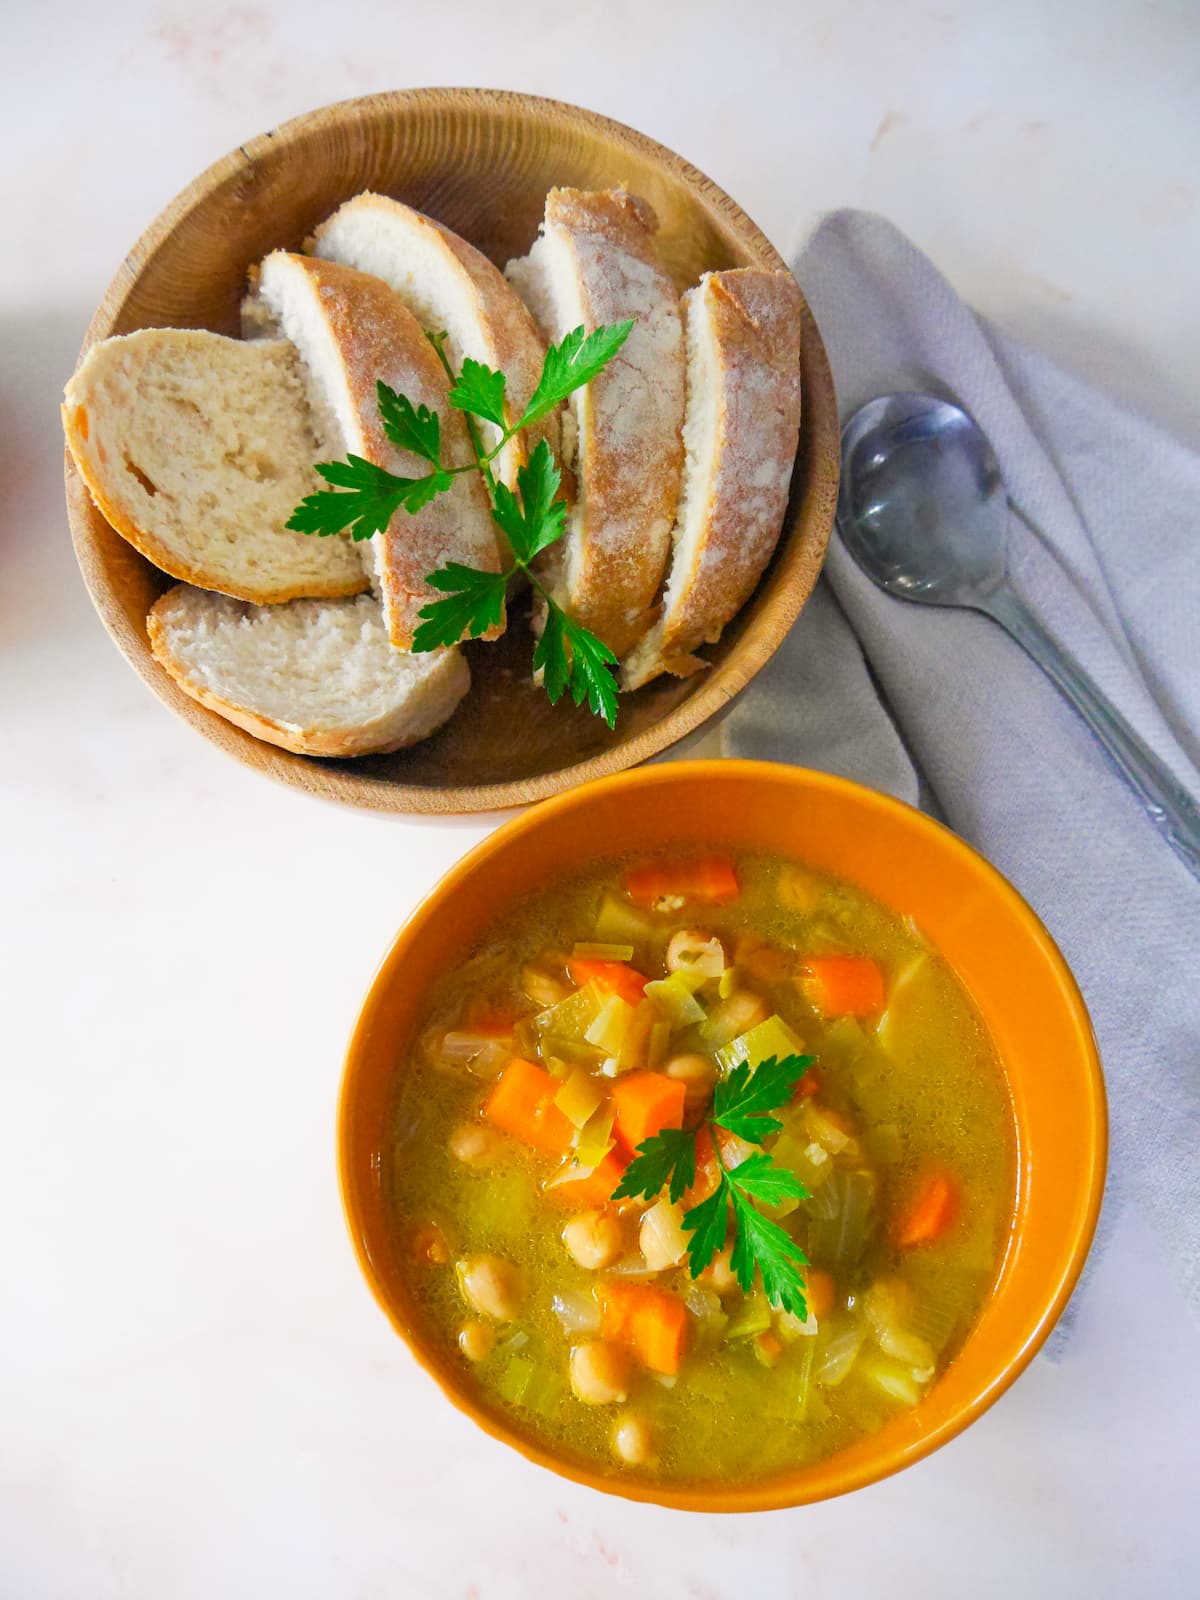 A bowl of leek, potato and chickpea soup with a bowl of sliced bread set alongside.